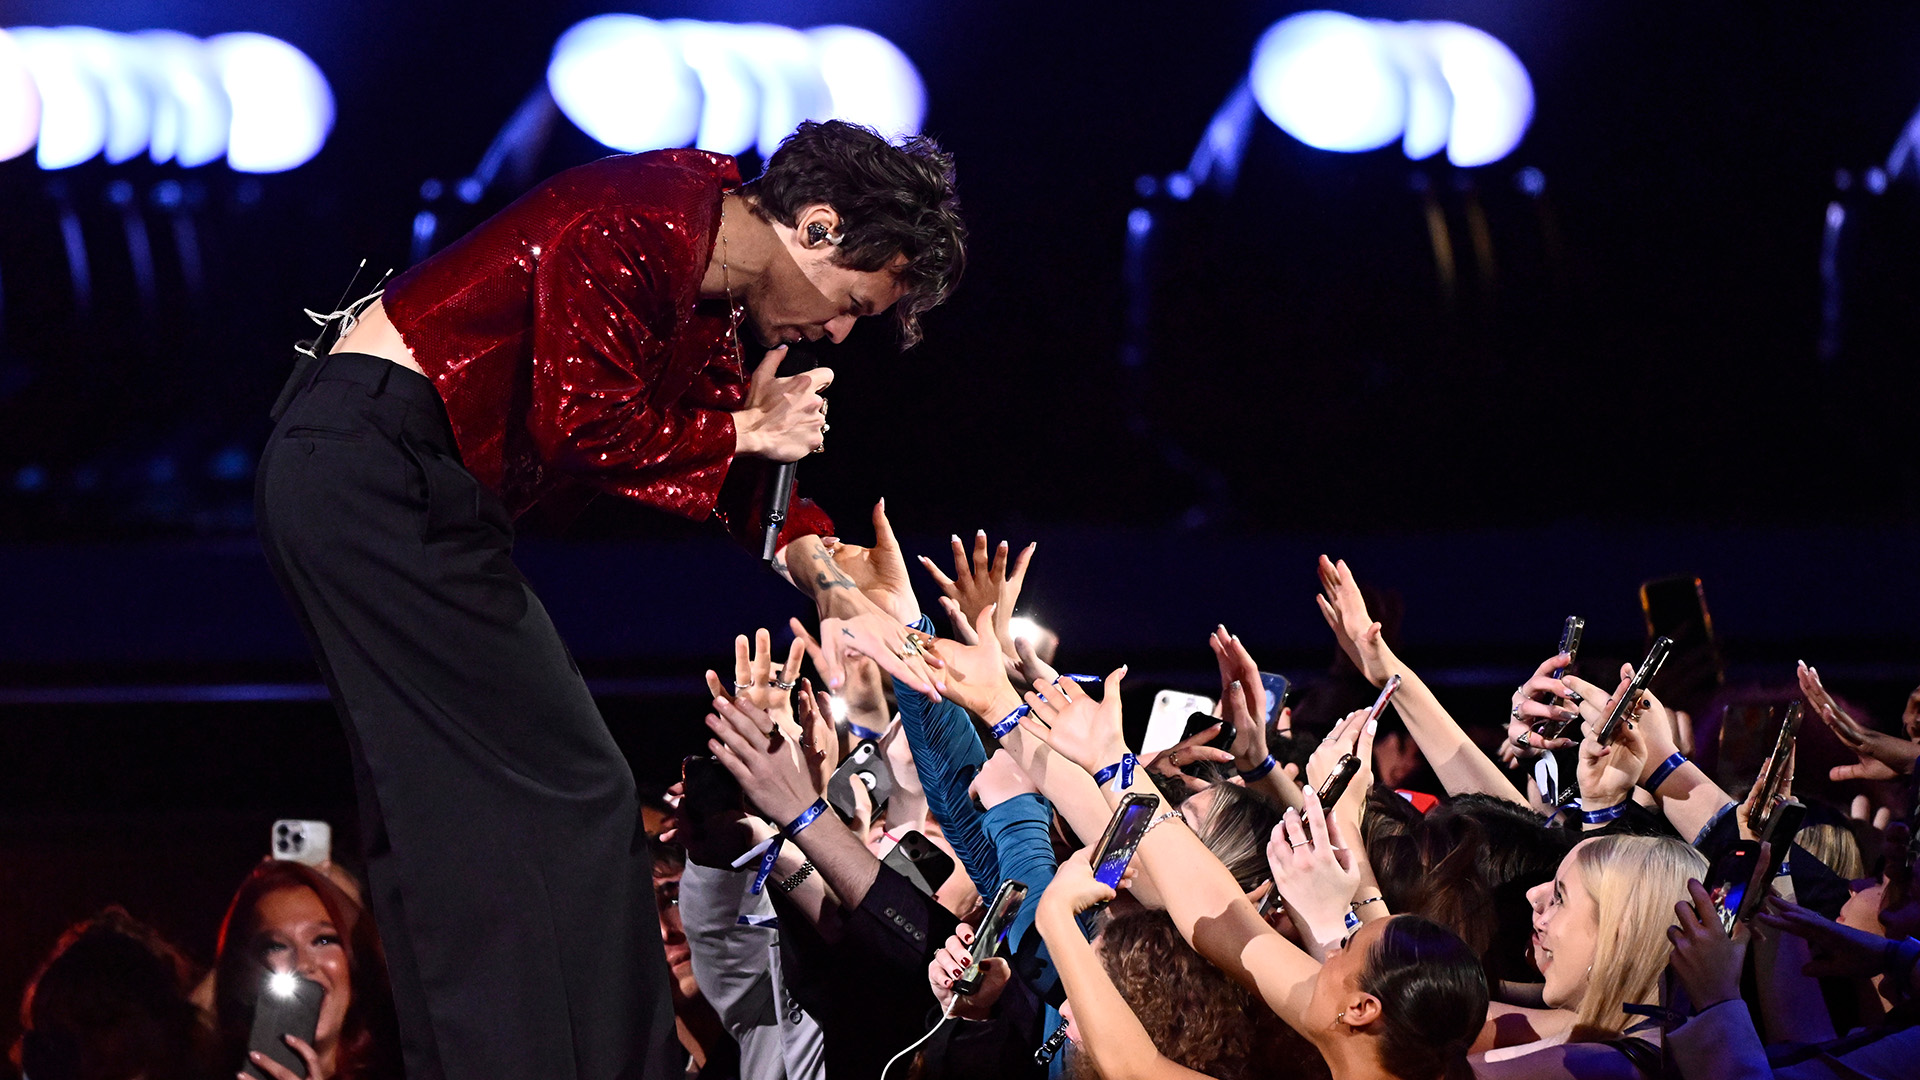 LONDON, ENGLAND - FEBRUARY 11: EDITORIAL USE ONLY Harry Styles meets fans during his performance during The BRIT Awards 2023 at The O2 Arena on February 11, 2023 in London, England. (Photo by Gareth Cattermole/Getty Images)